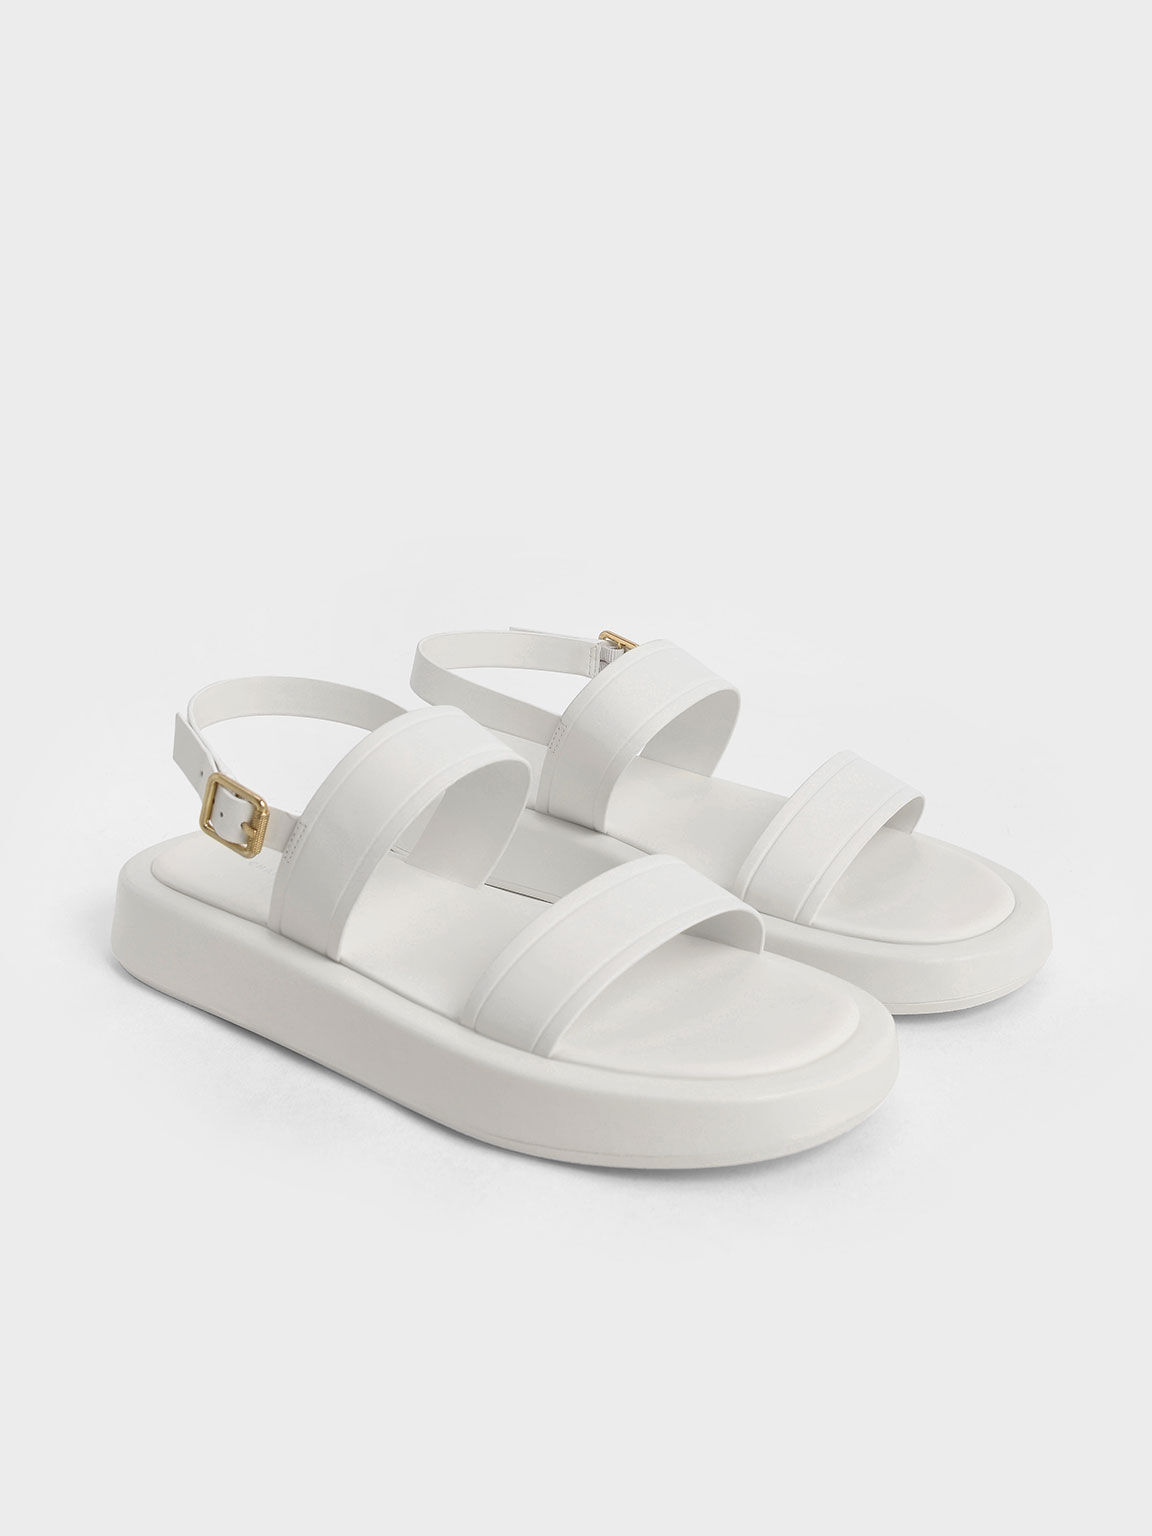 White Open Toe Slingback Platform Sandals - CHARLES & KEITH IL